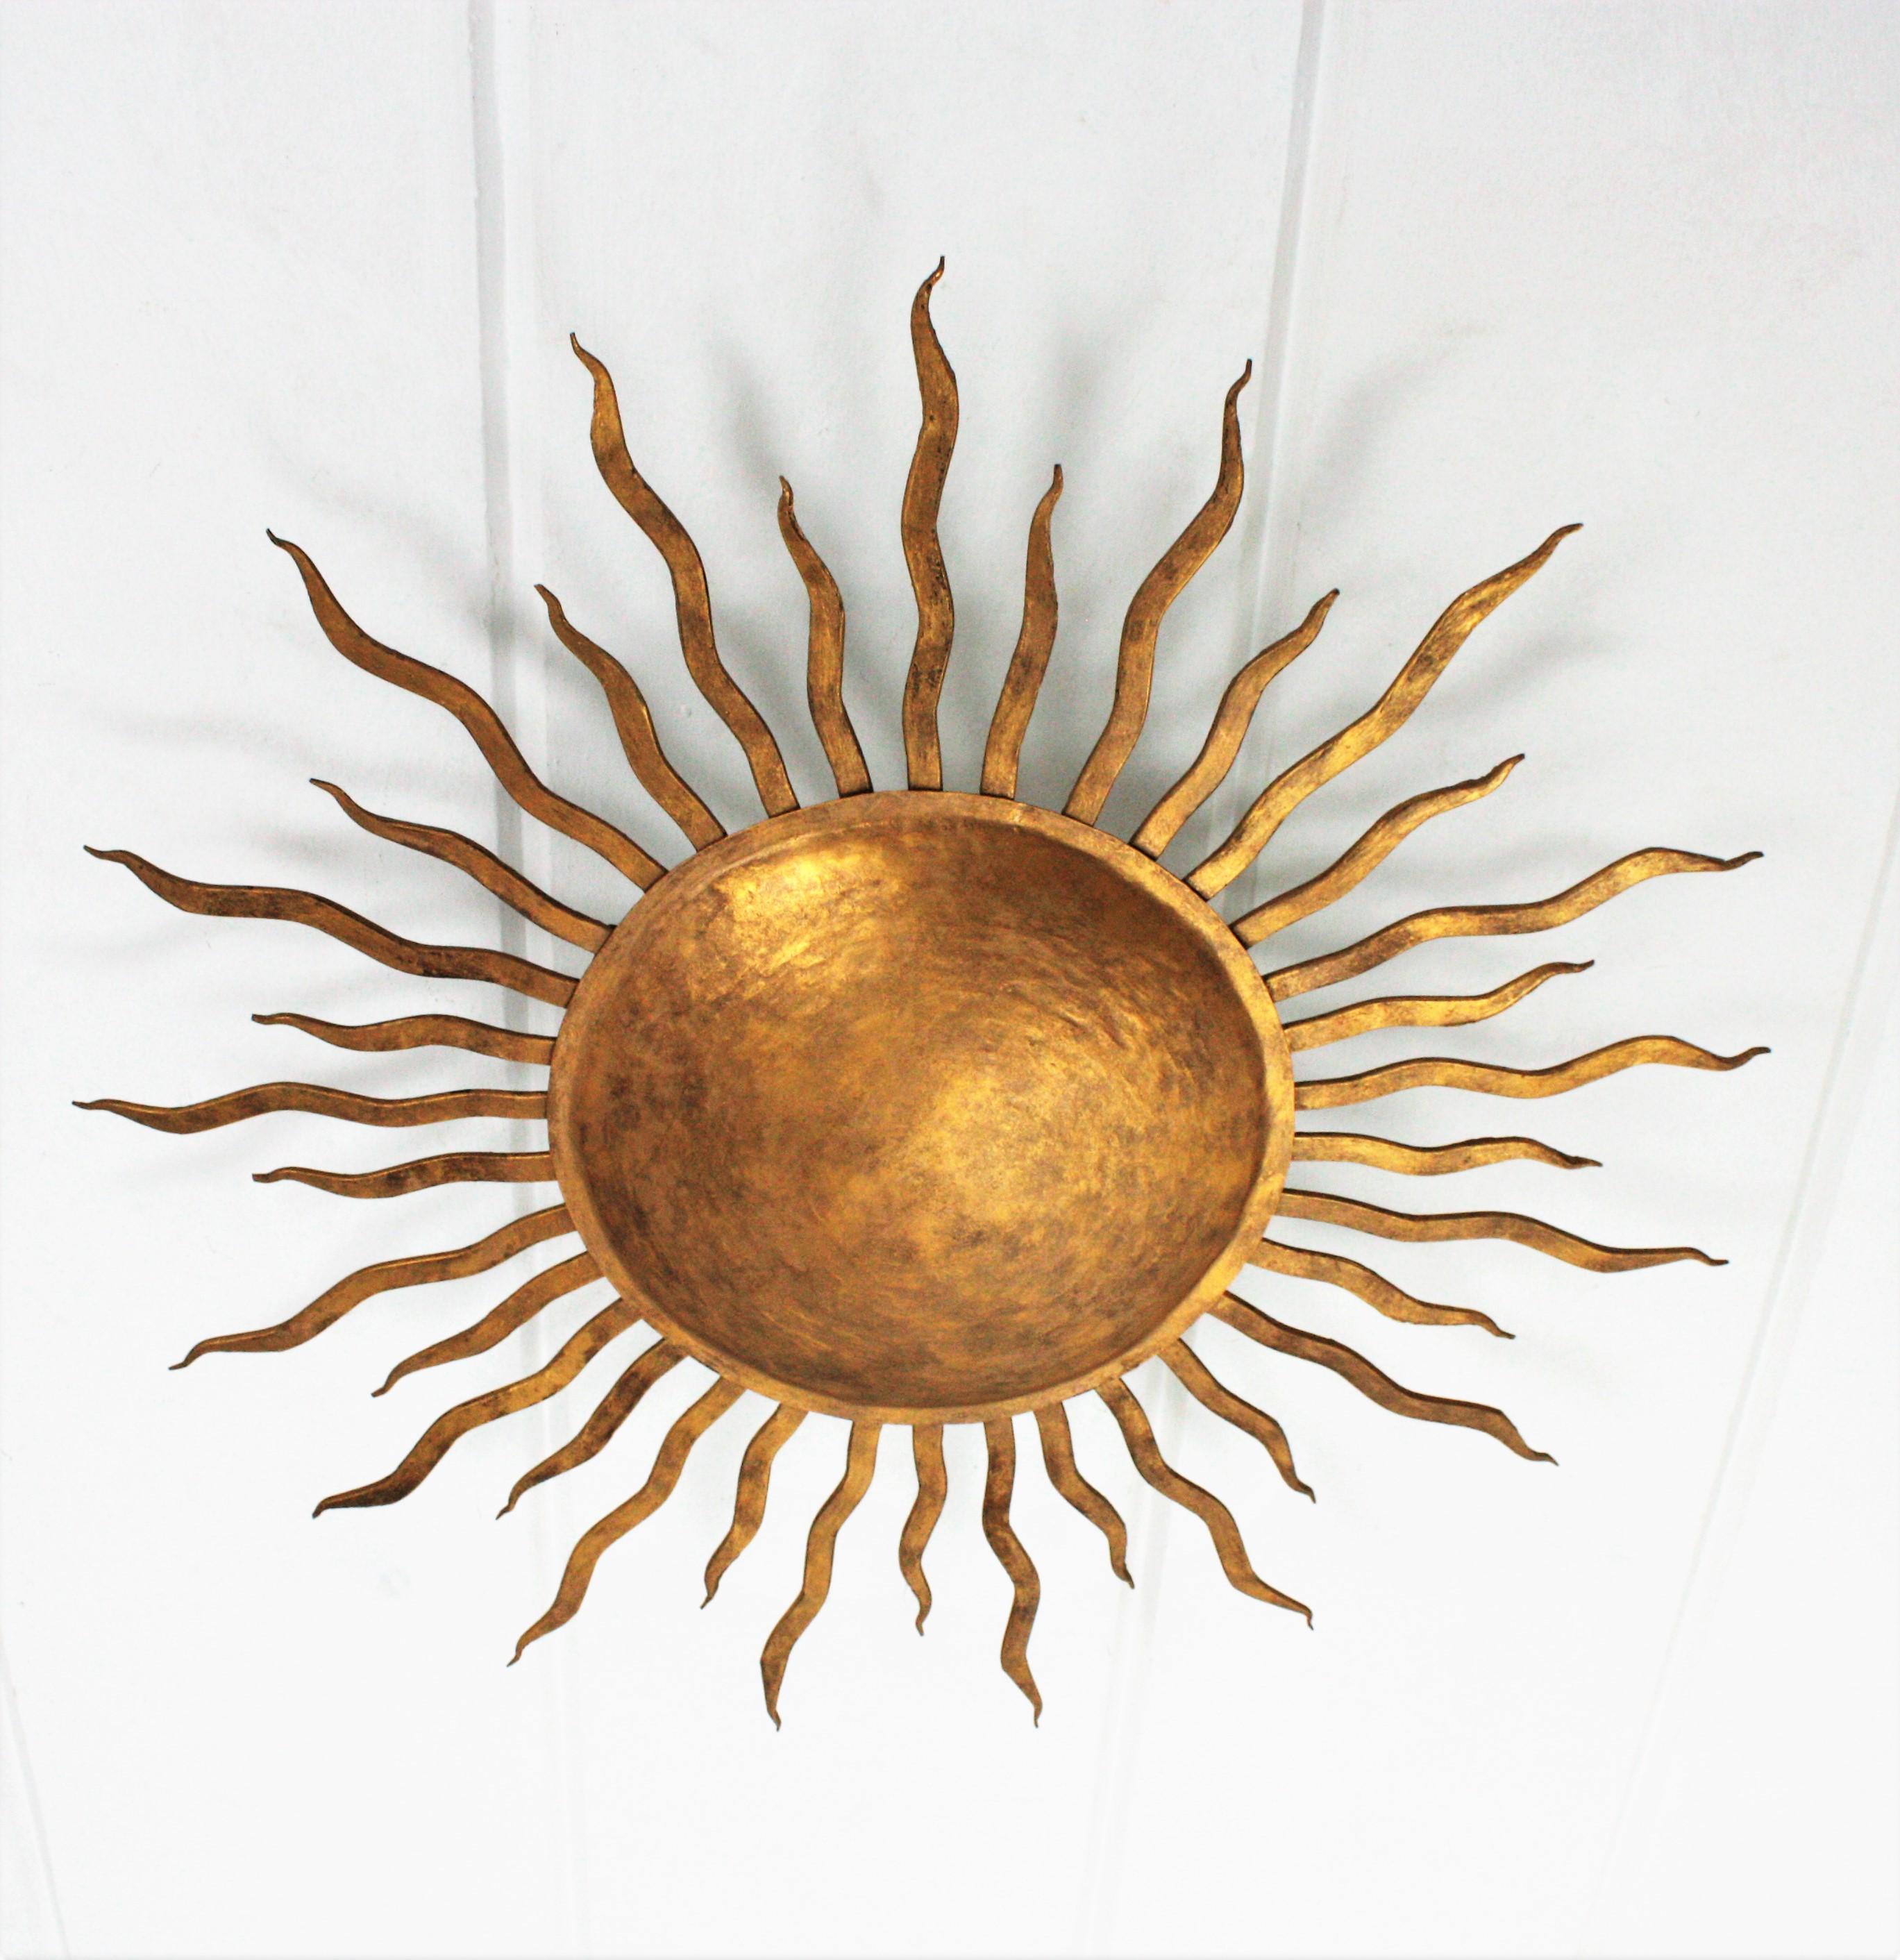 A beautiful hand-hammered sunburst flush mount with gold leaf finish made in wrought iron, Spain, 1950s.
It has thick rays in two sizes surrounding the central large sphere.
It can be placed flush mounted or as a pendant or chandelier hanging on a